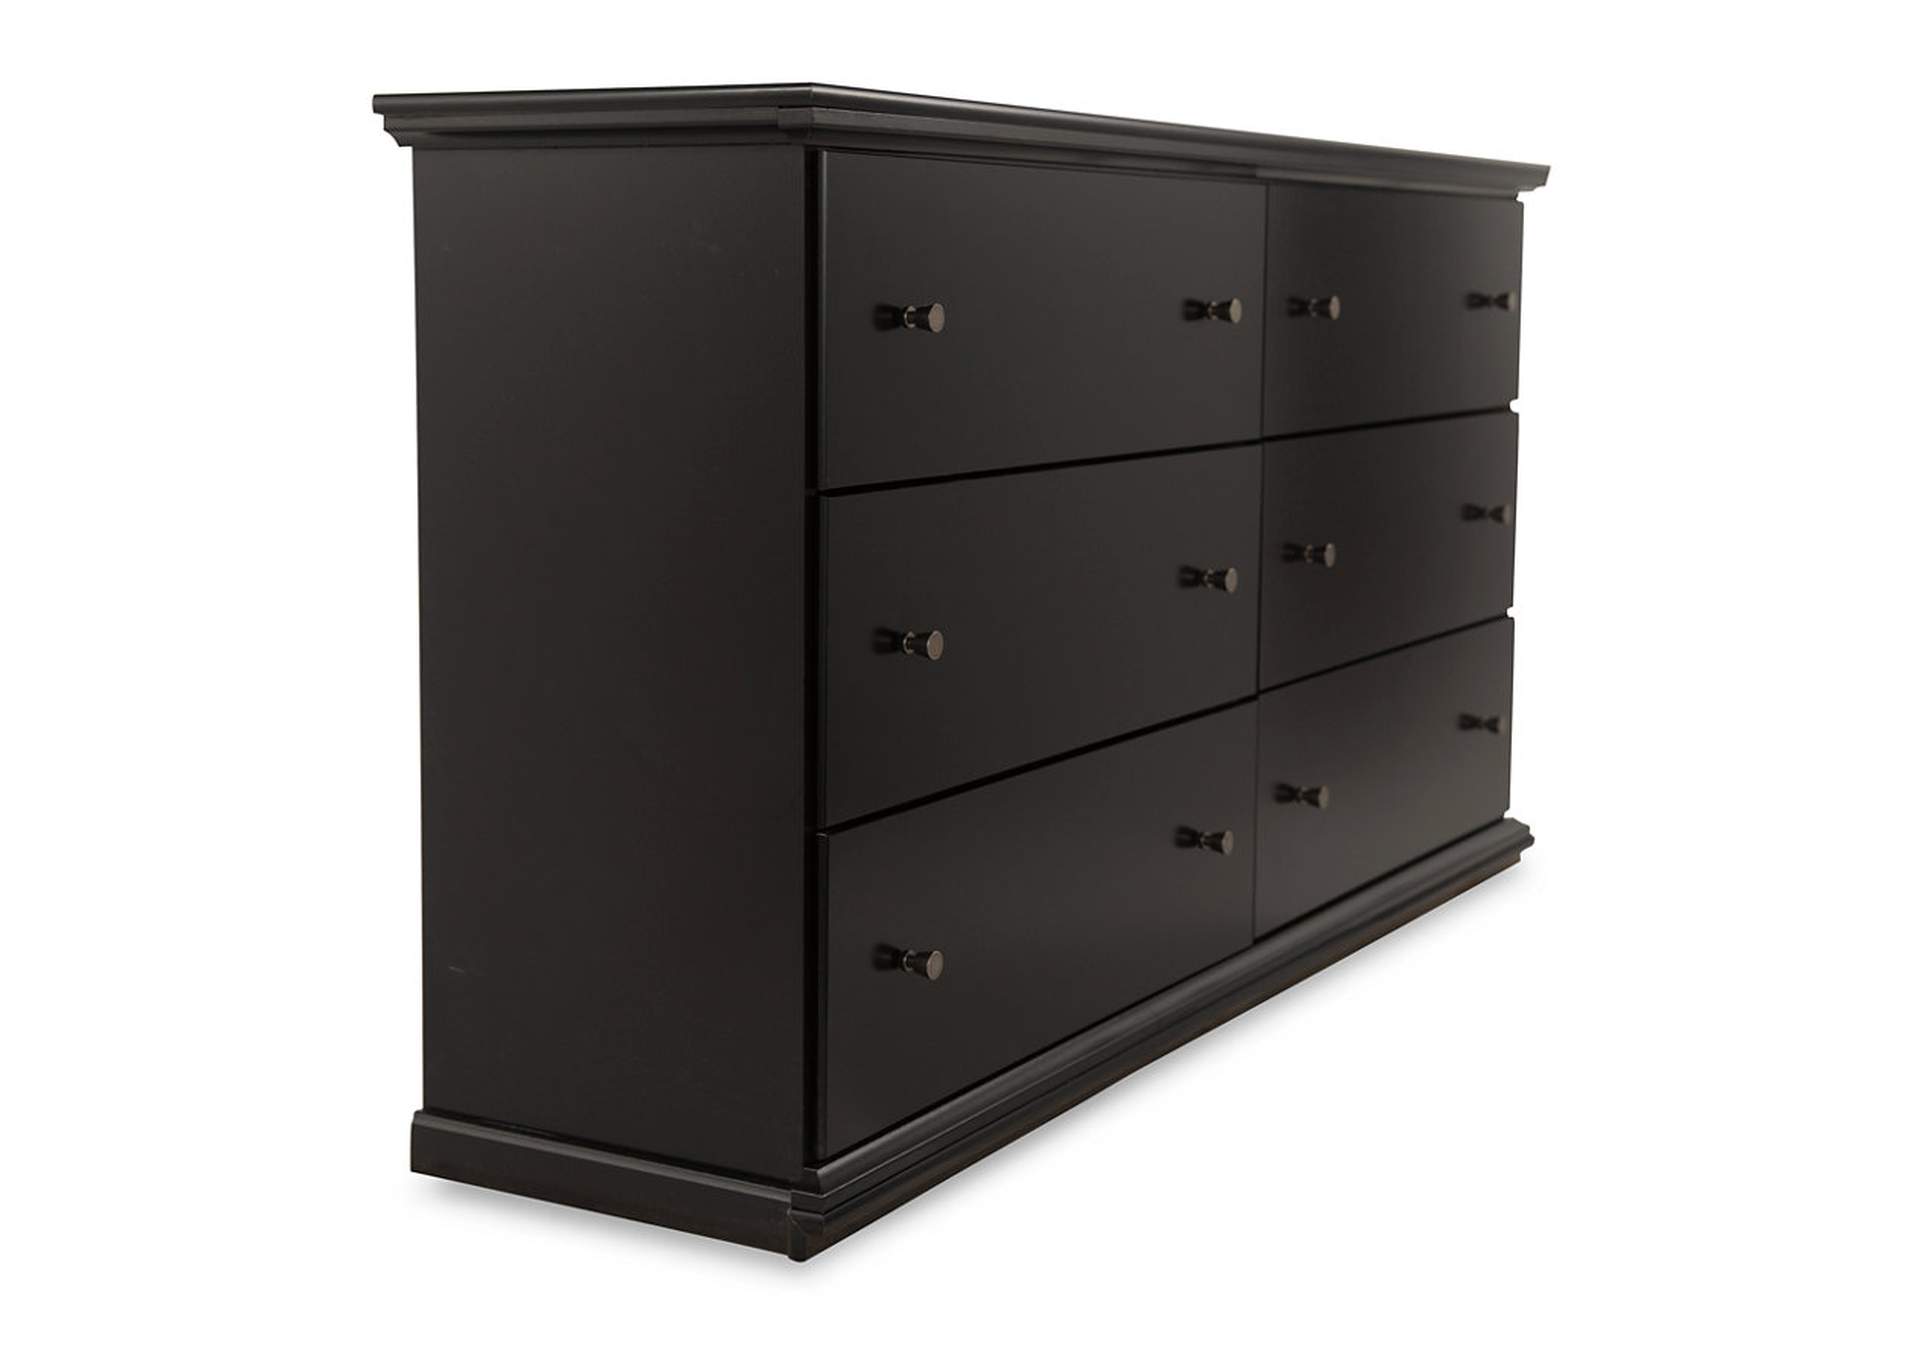 Maribel King Panel Bed, Dresser, Mirror, Chest, and 2 Nightstands,Signature Design By Ashley